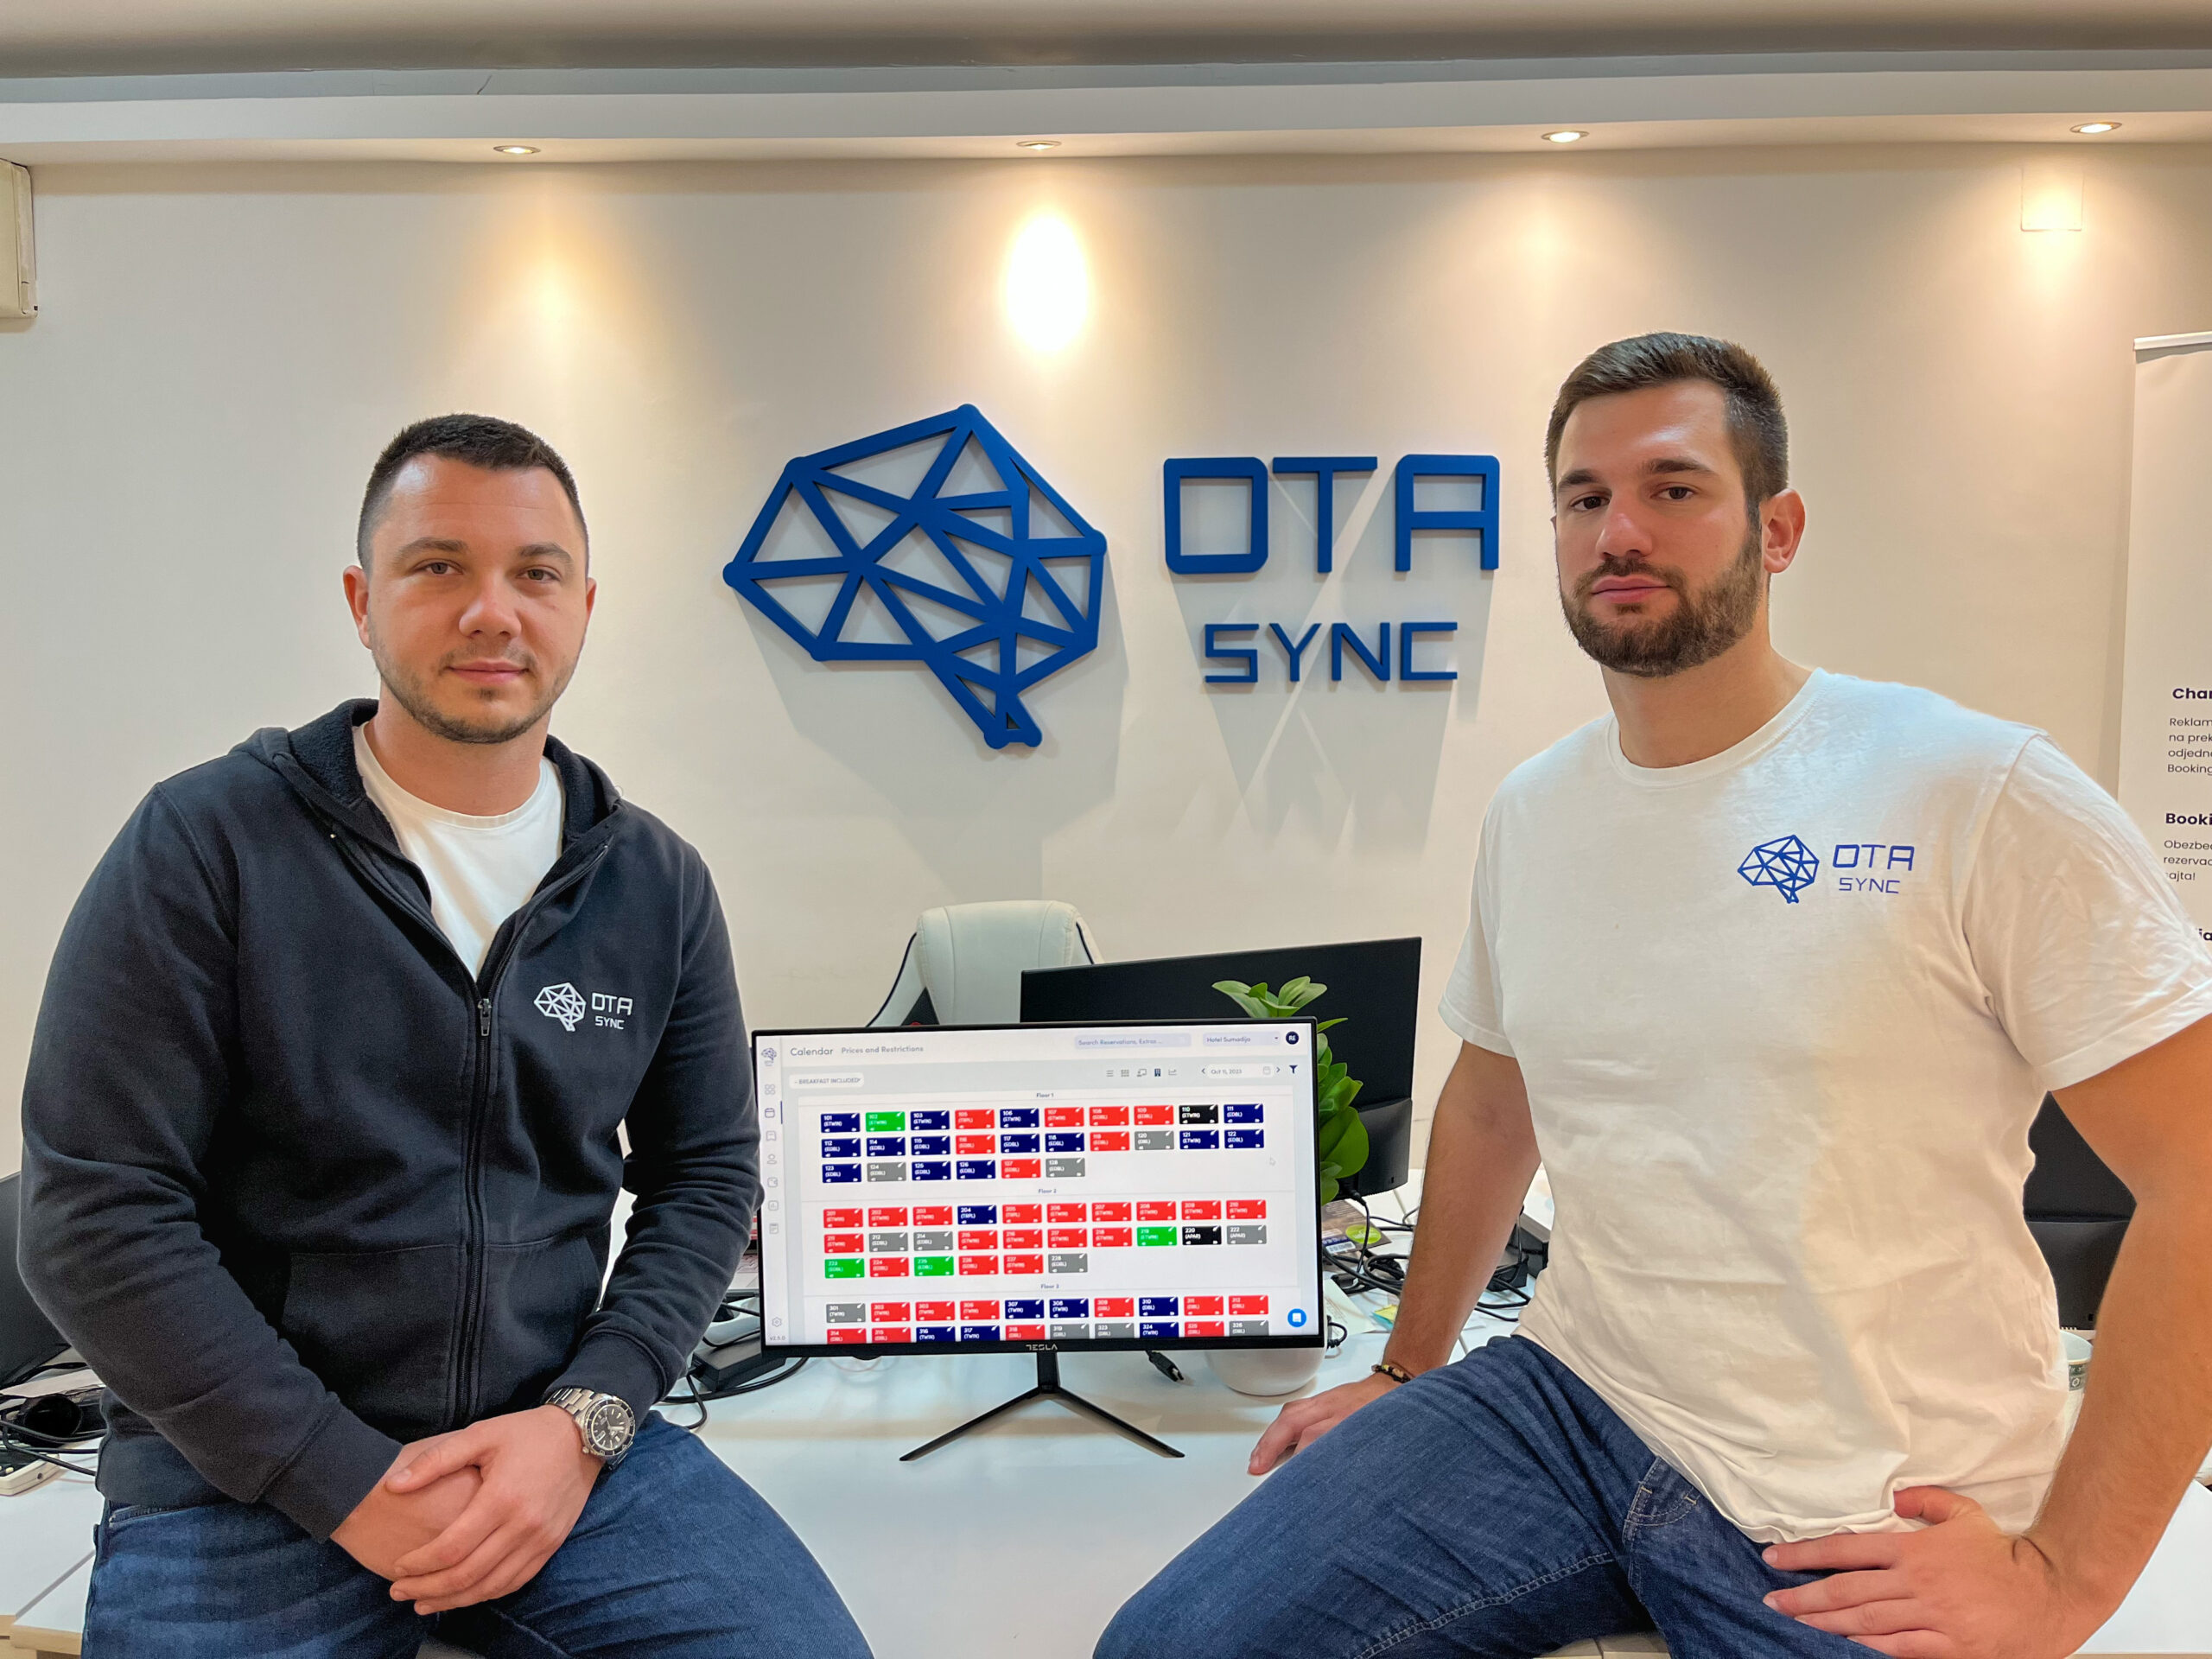 OTA Sync is closing an International Seed round of €1.3M led by Presto Ventures